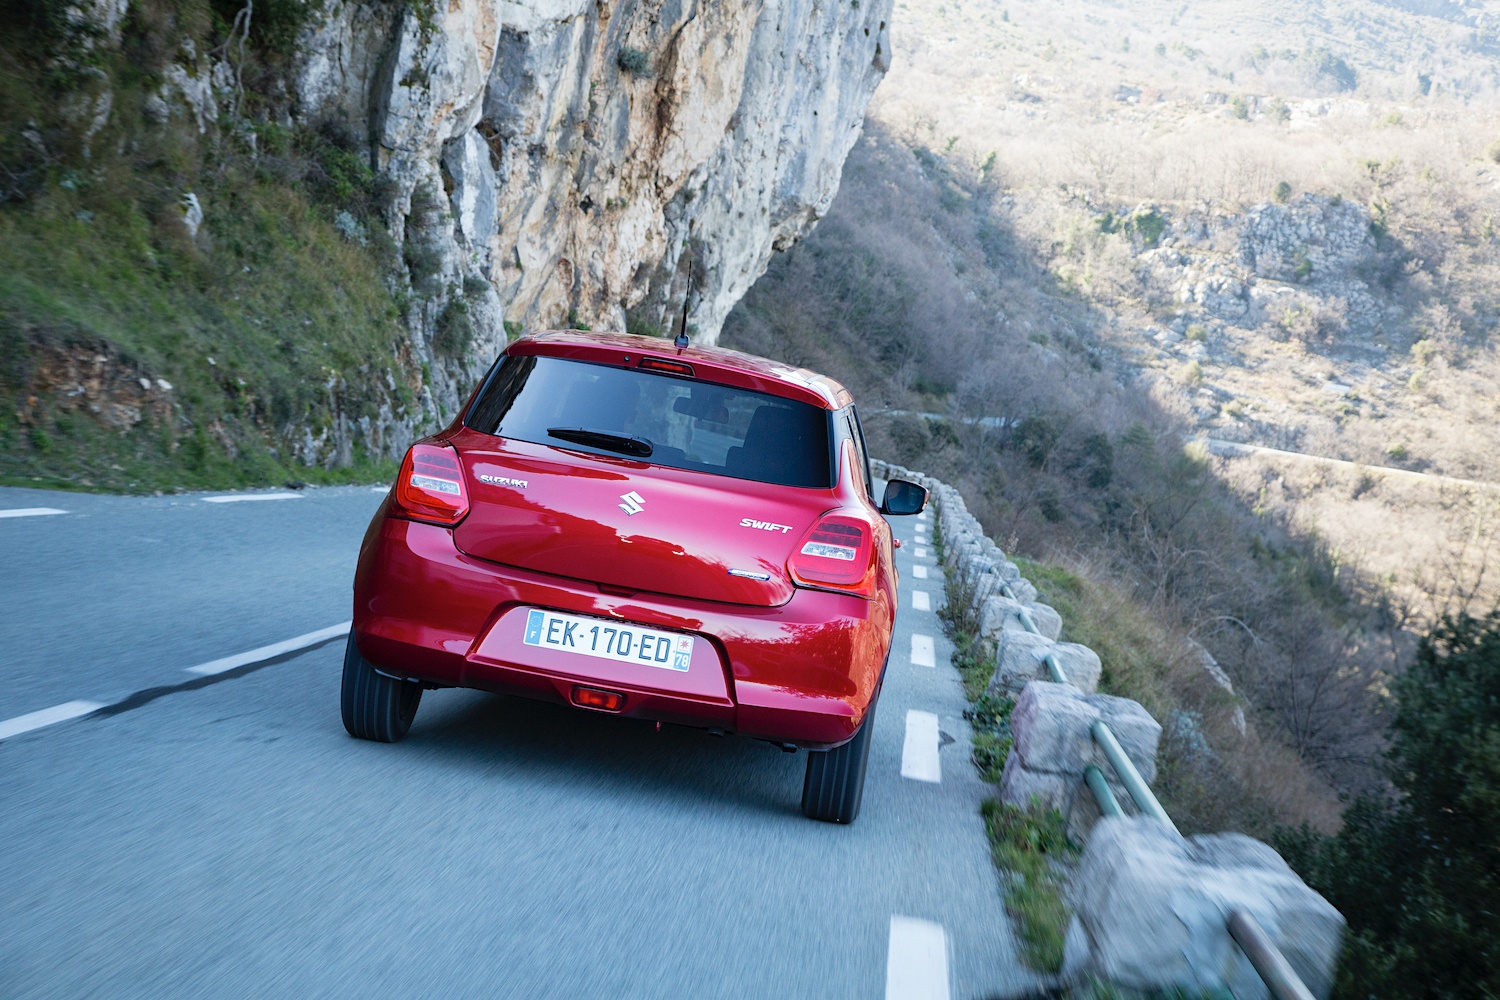 Tom Scanlan reviews the All-New Suzuki Swift for Drive 12